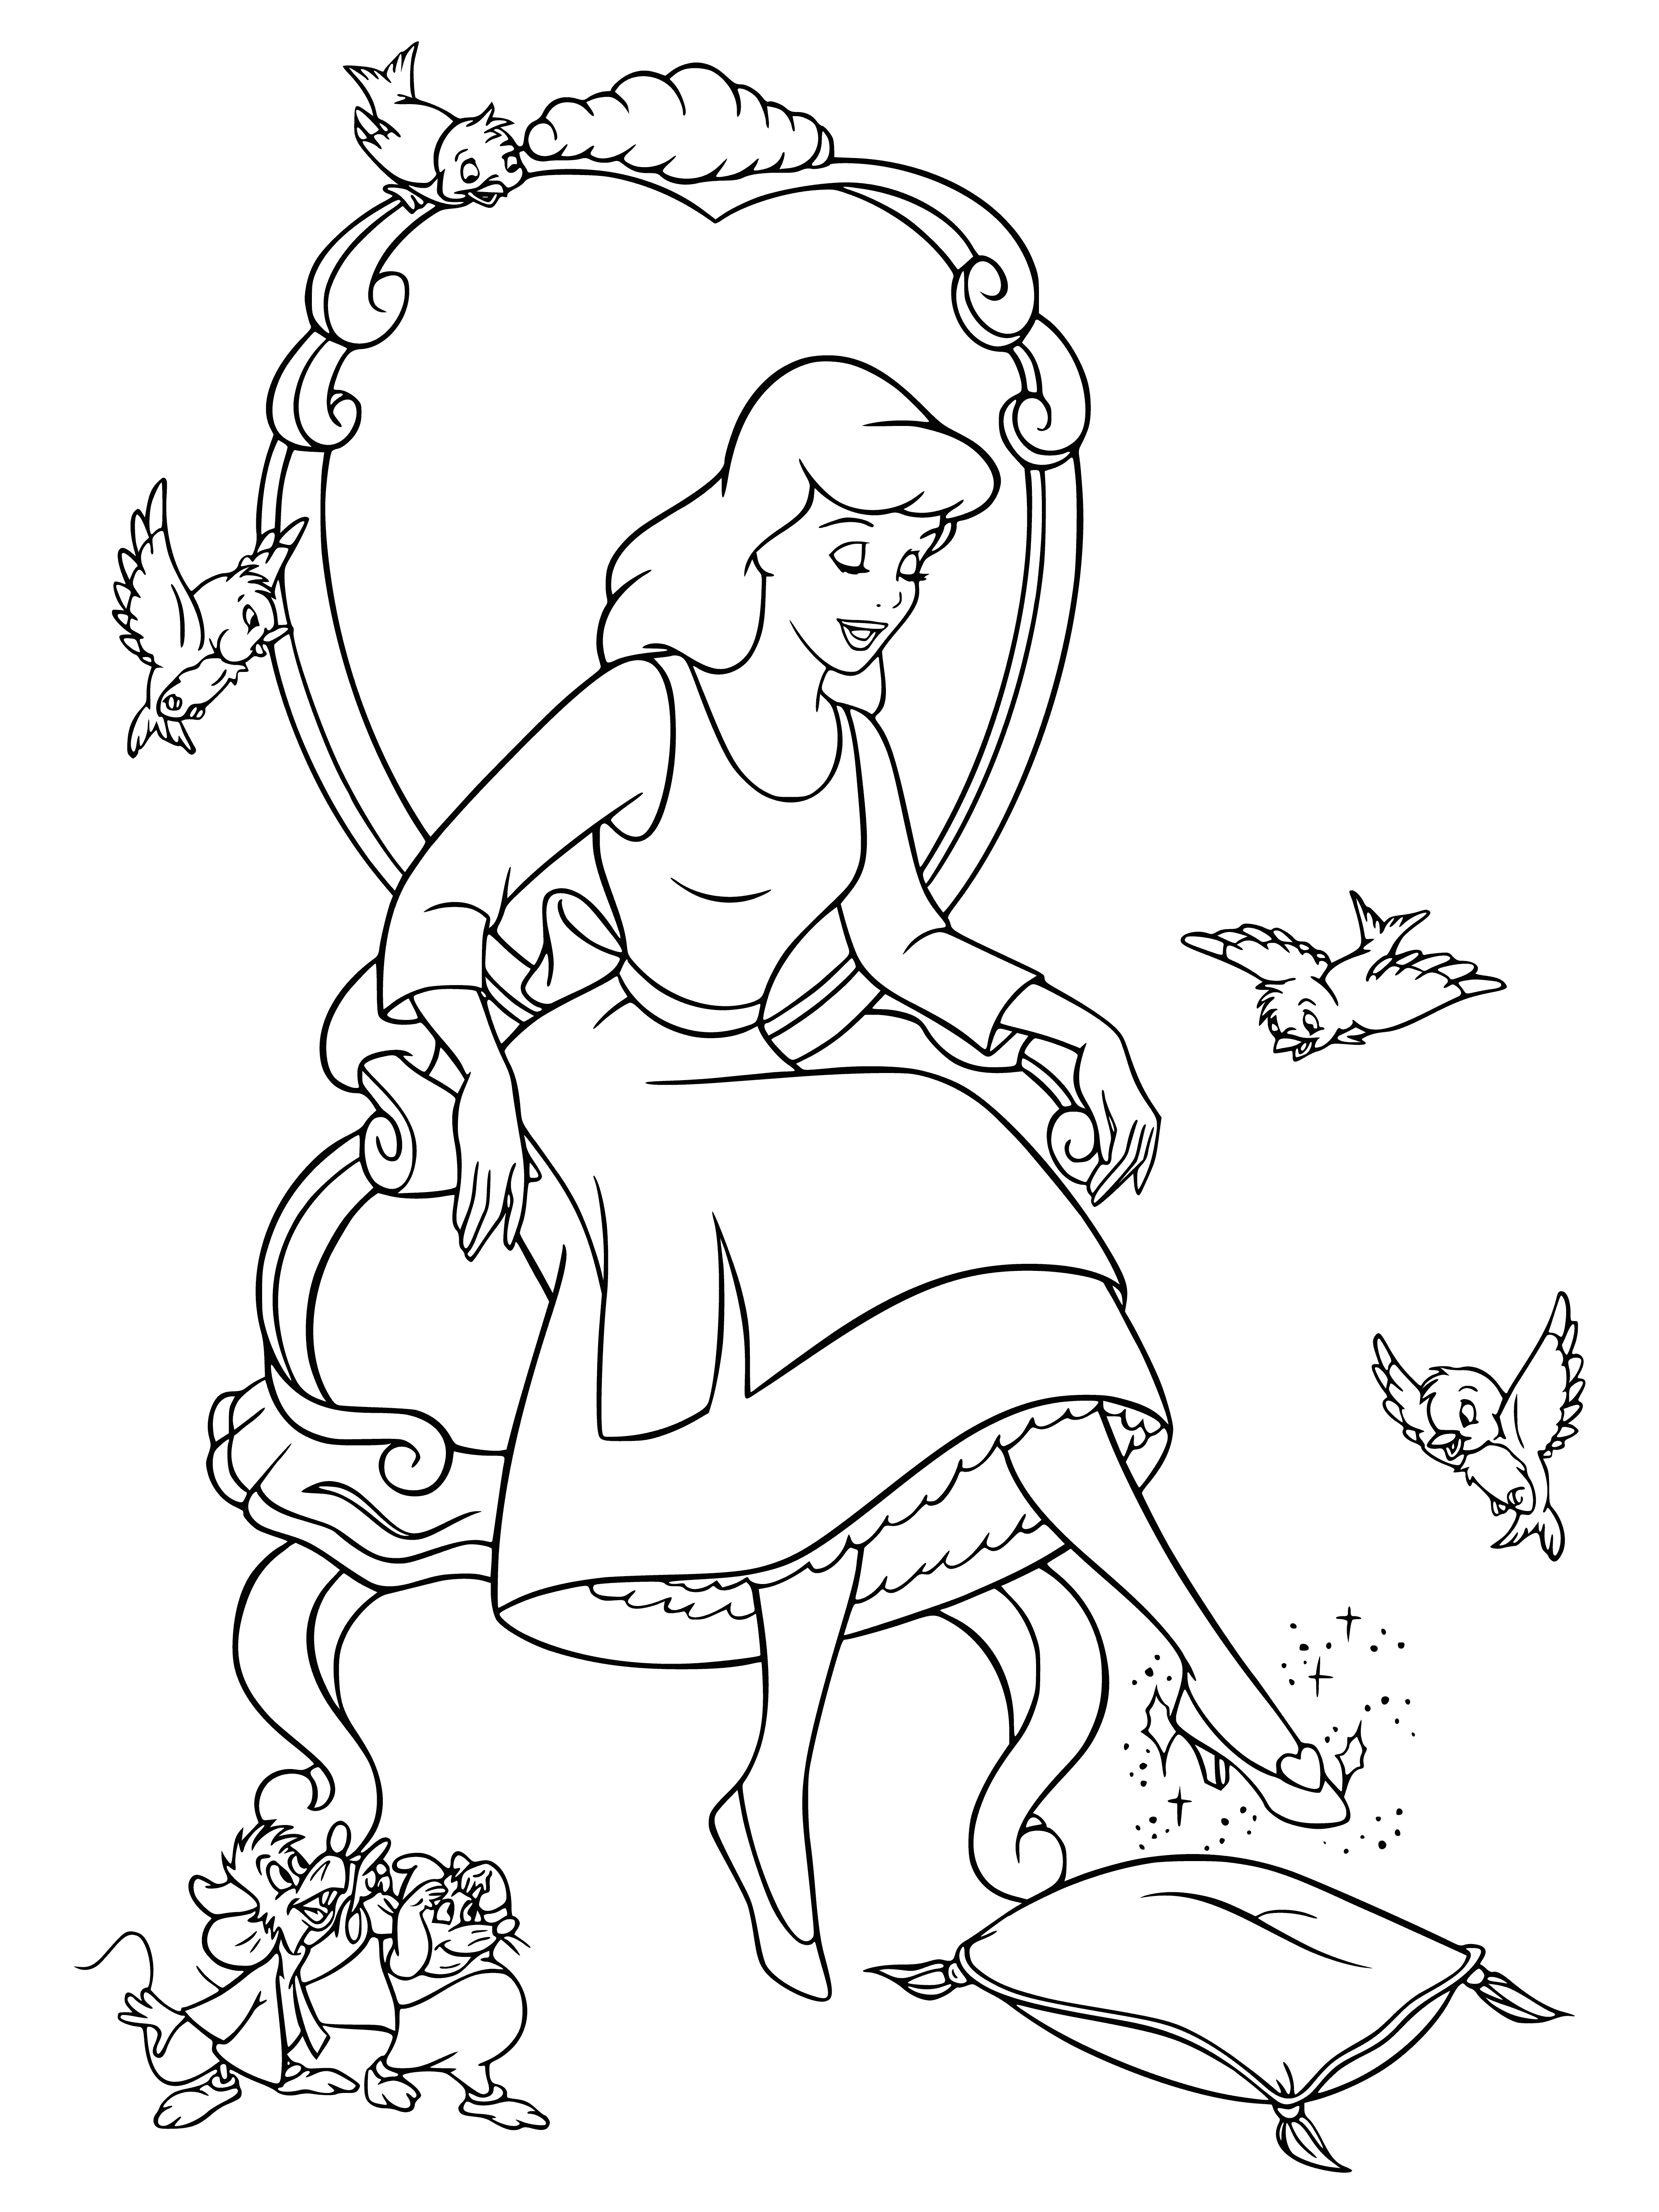 coloring page: Cinderella holds pumpkin & crystal shoe, wearing blue dress & glass slippers, standing before fire.